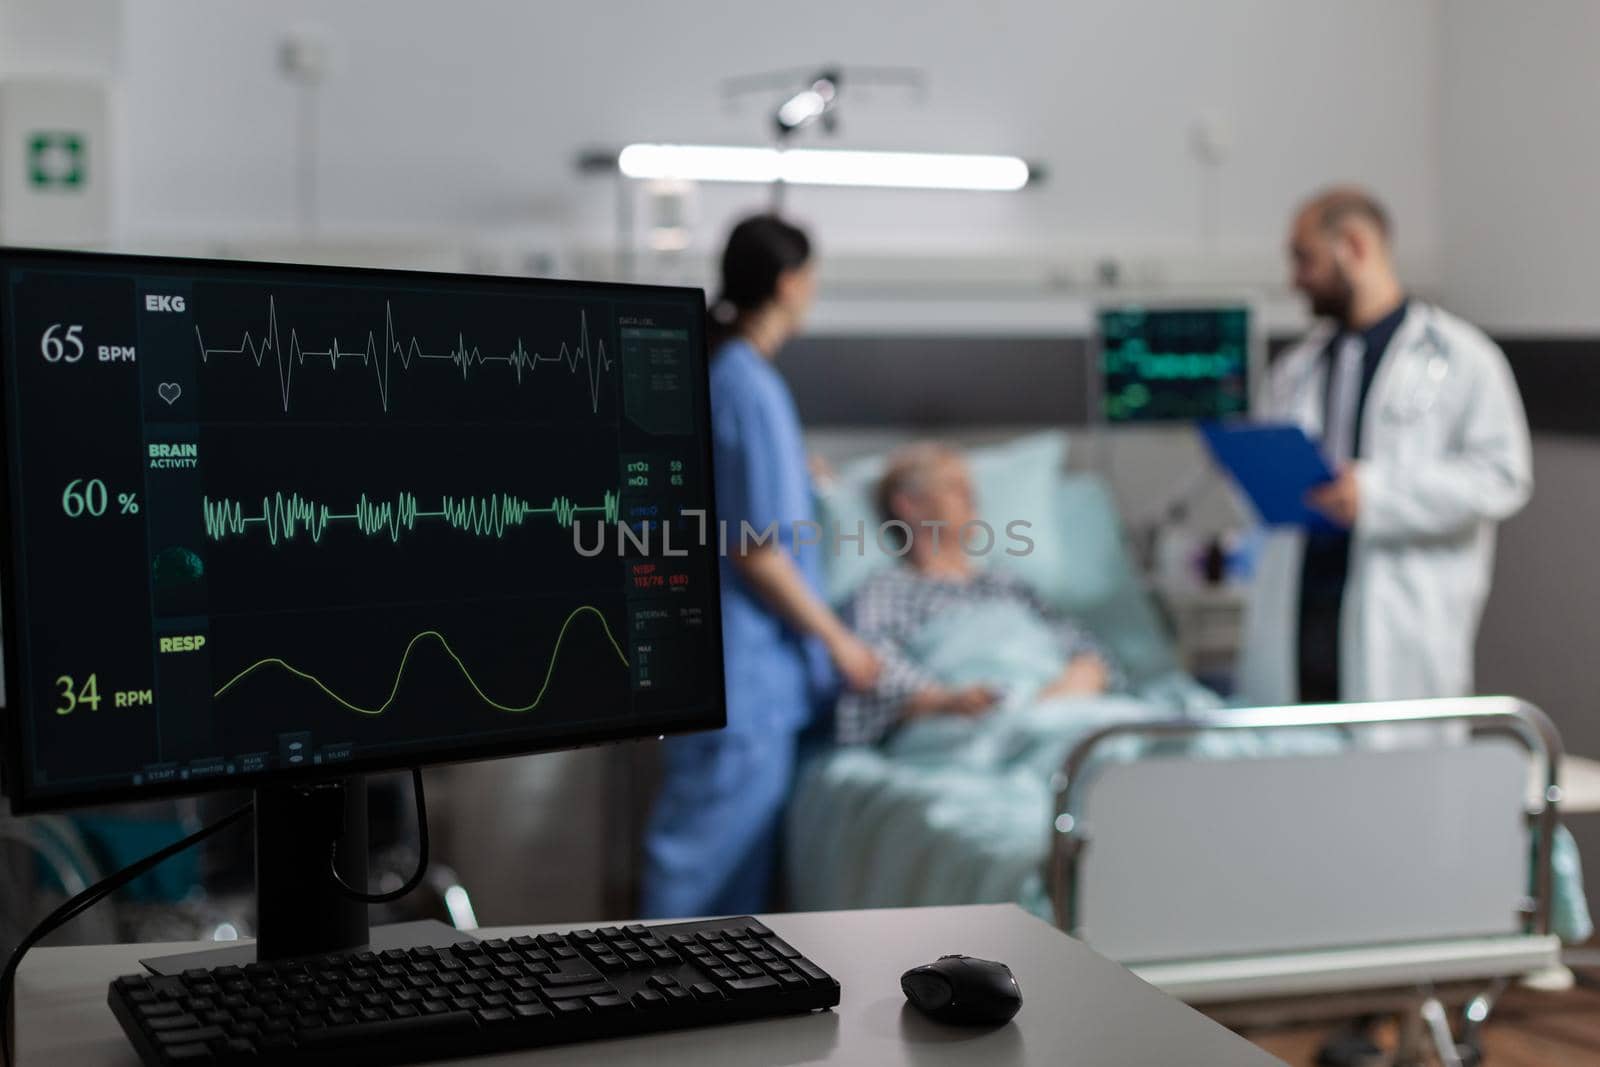 Monitor in hospital ward showing bmp from patient by DCStudio